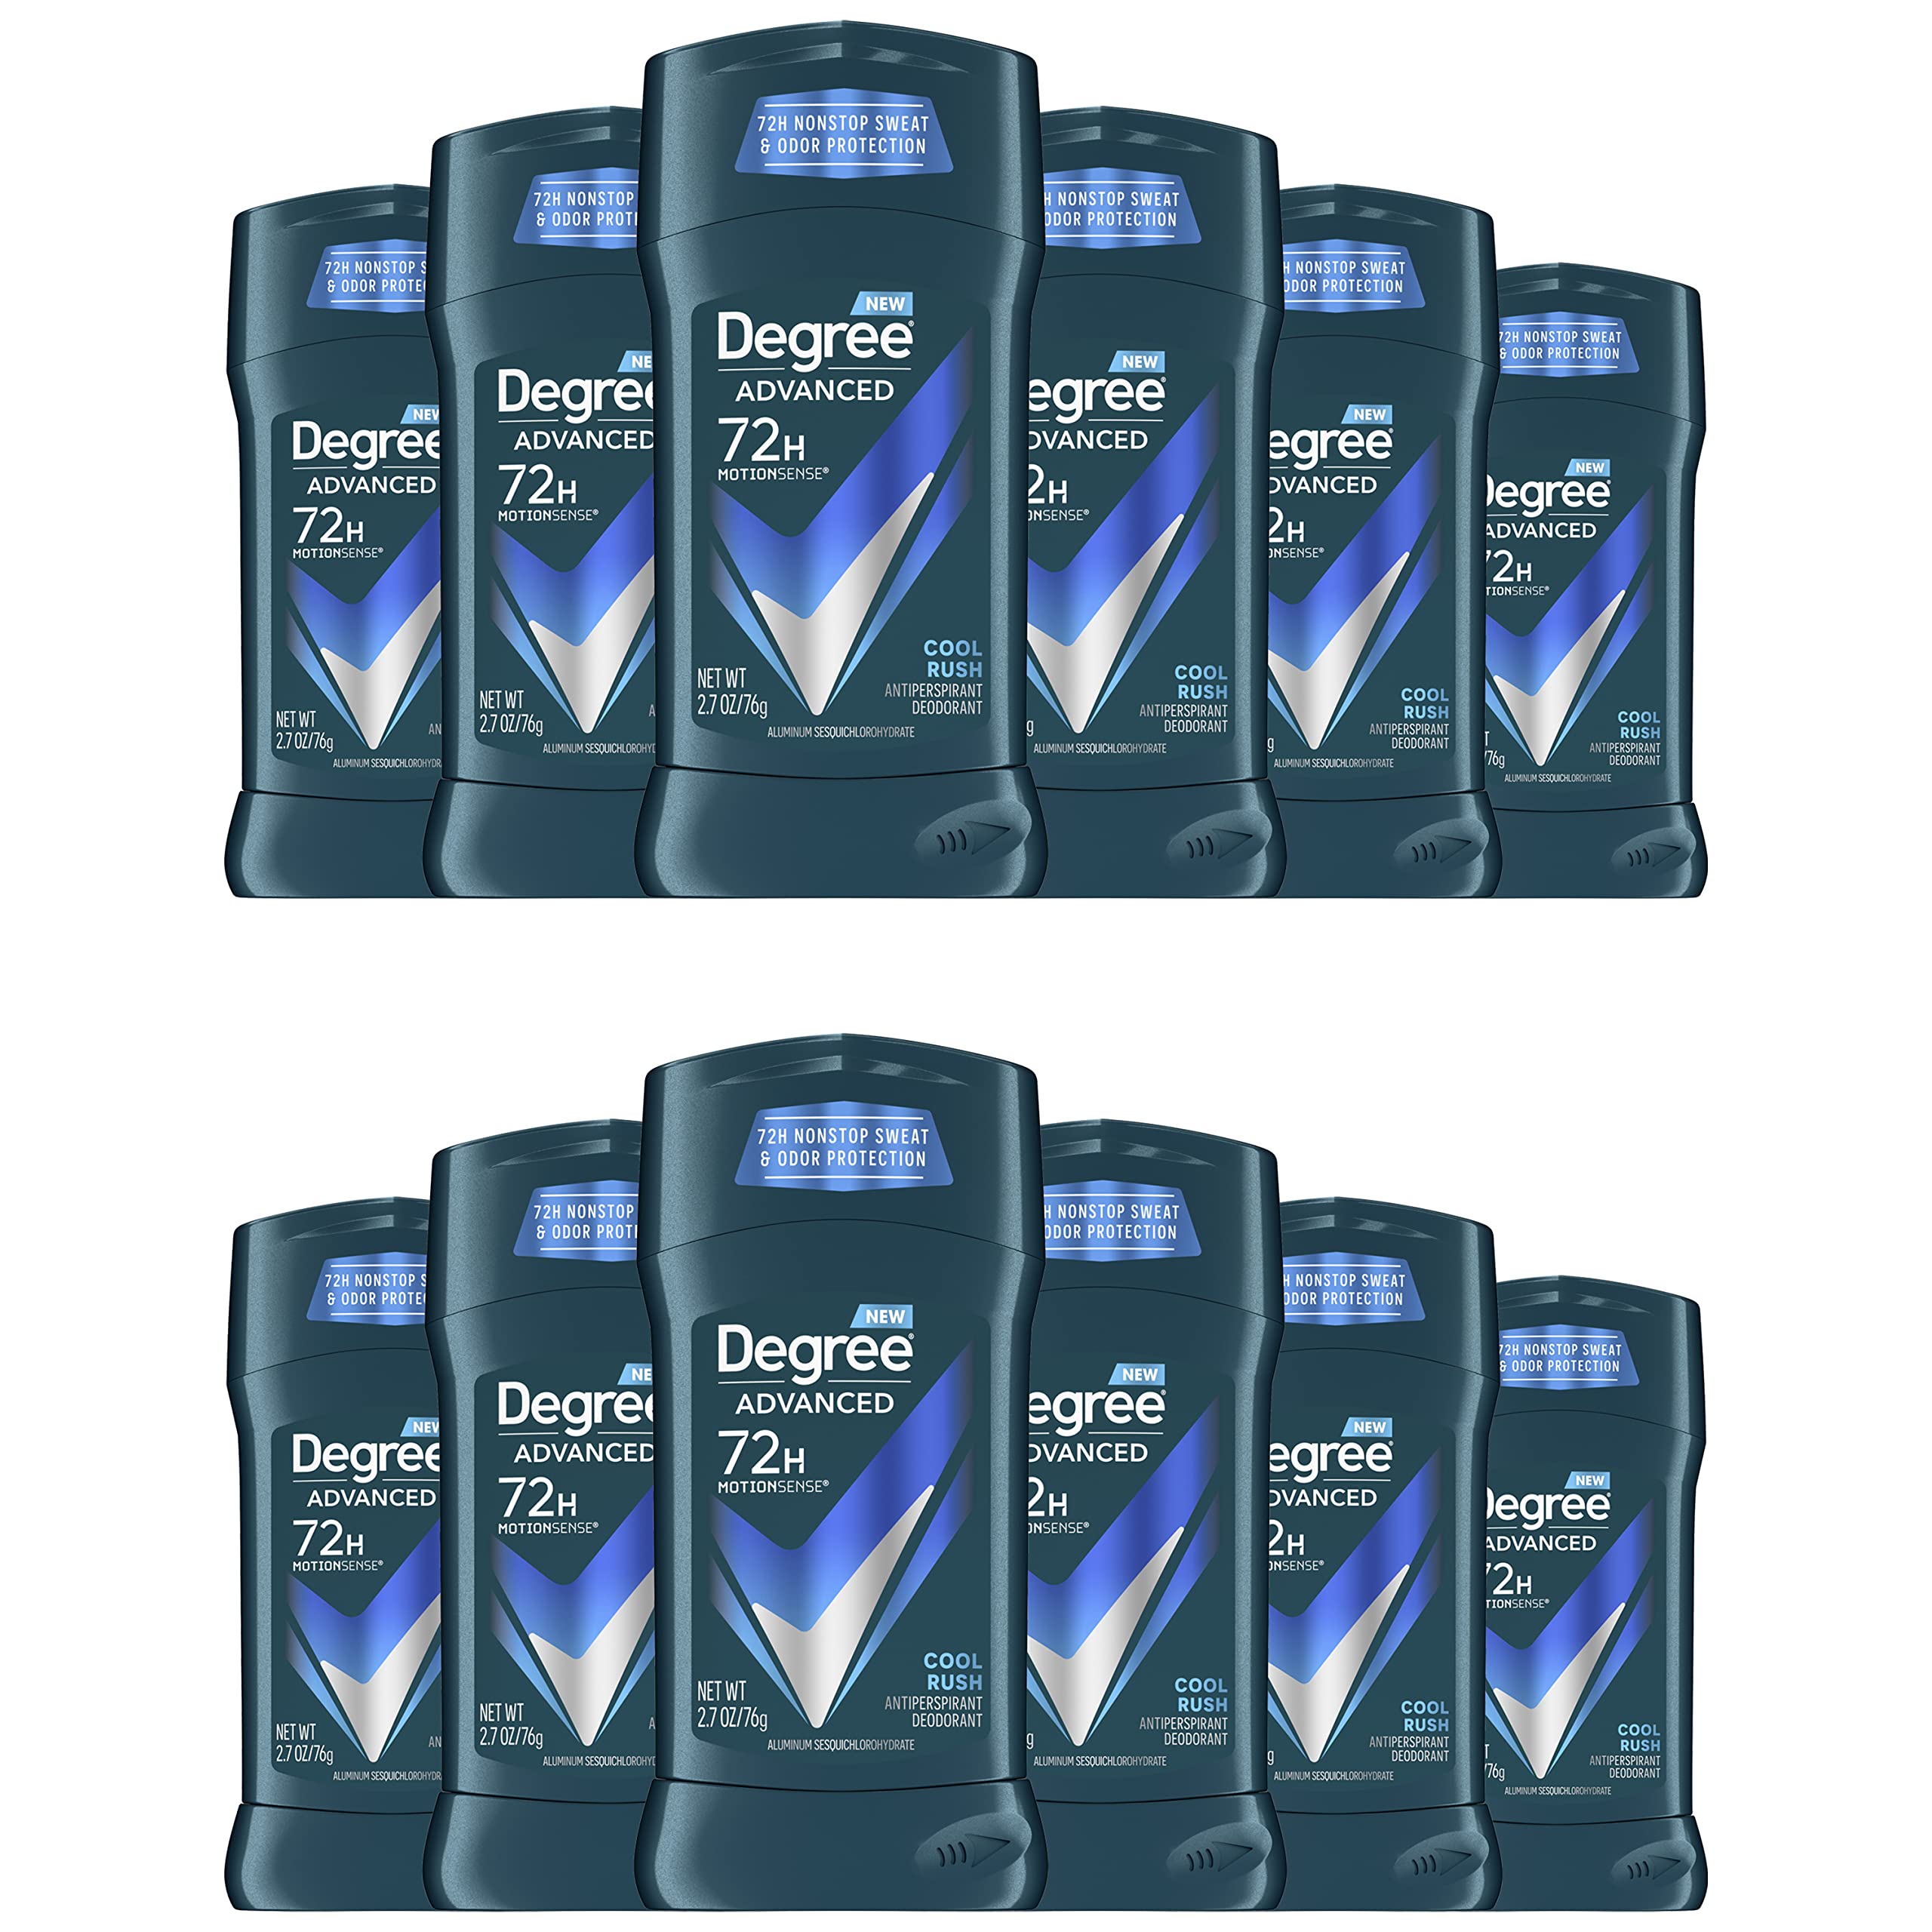 Degree Men Advanced Protection Antiperspirant Deodorant Cool Rush, Pack of 12, 72-Hour Sweat and Odor Protection Antiperspirant For Men With MotionSense Technology 2.7 oz